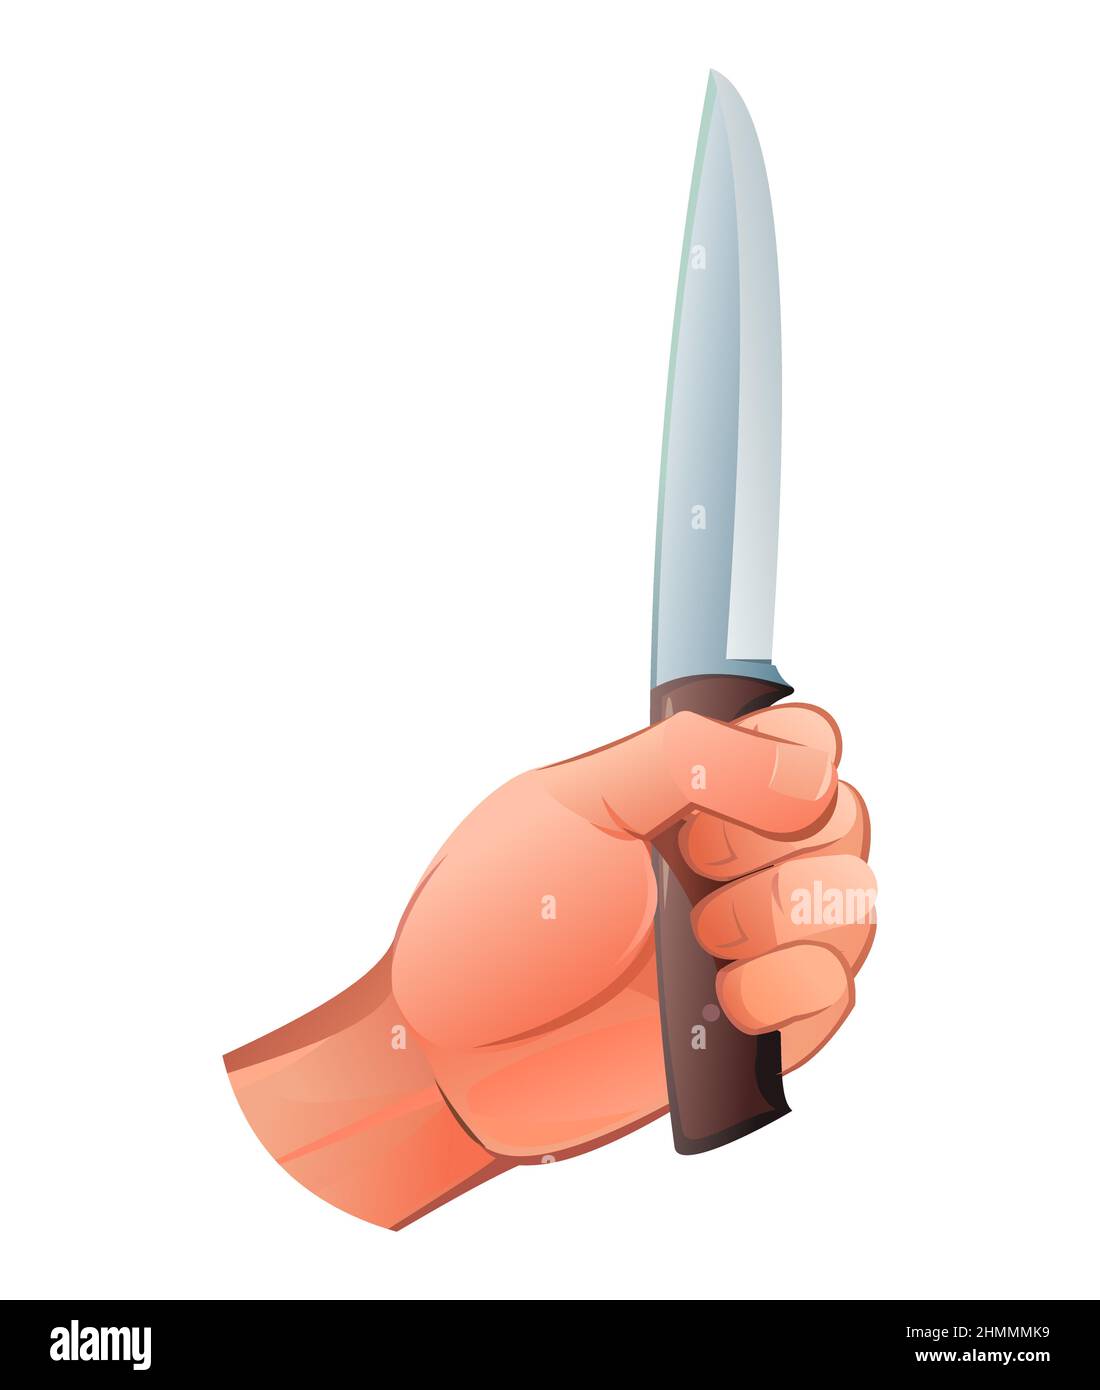 Hand with knife up. Object isolated on white background. Funny cartoon style. Vector. Stock Vector